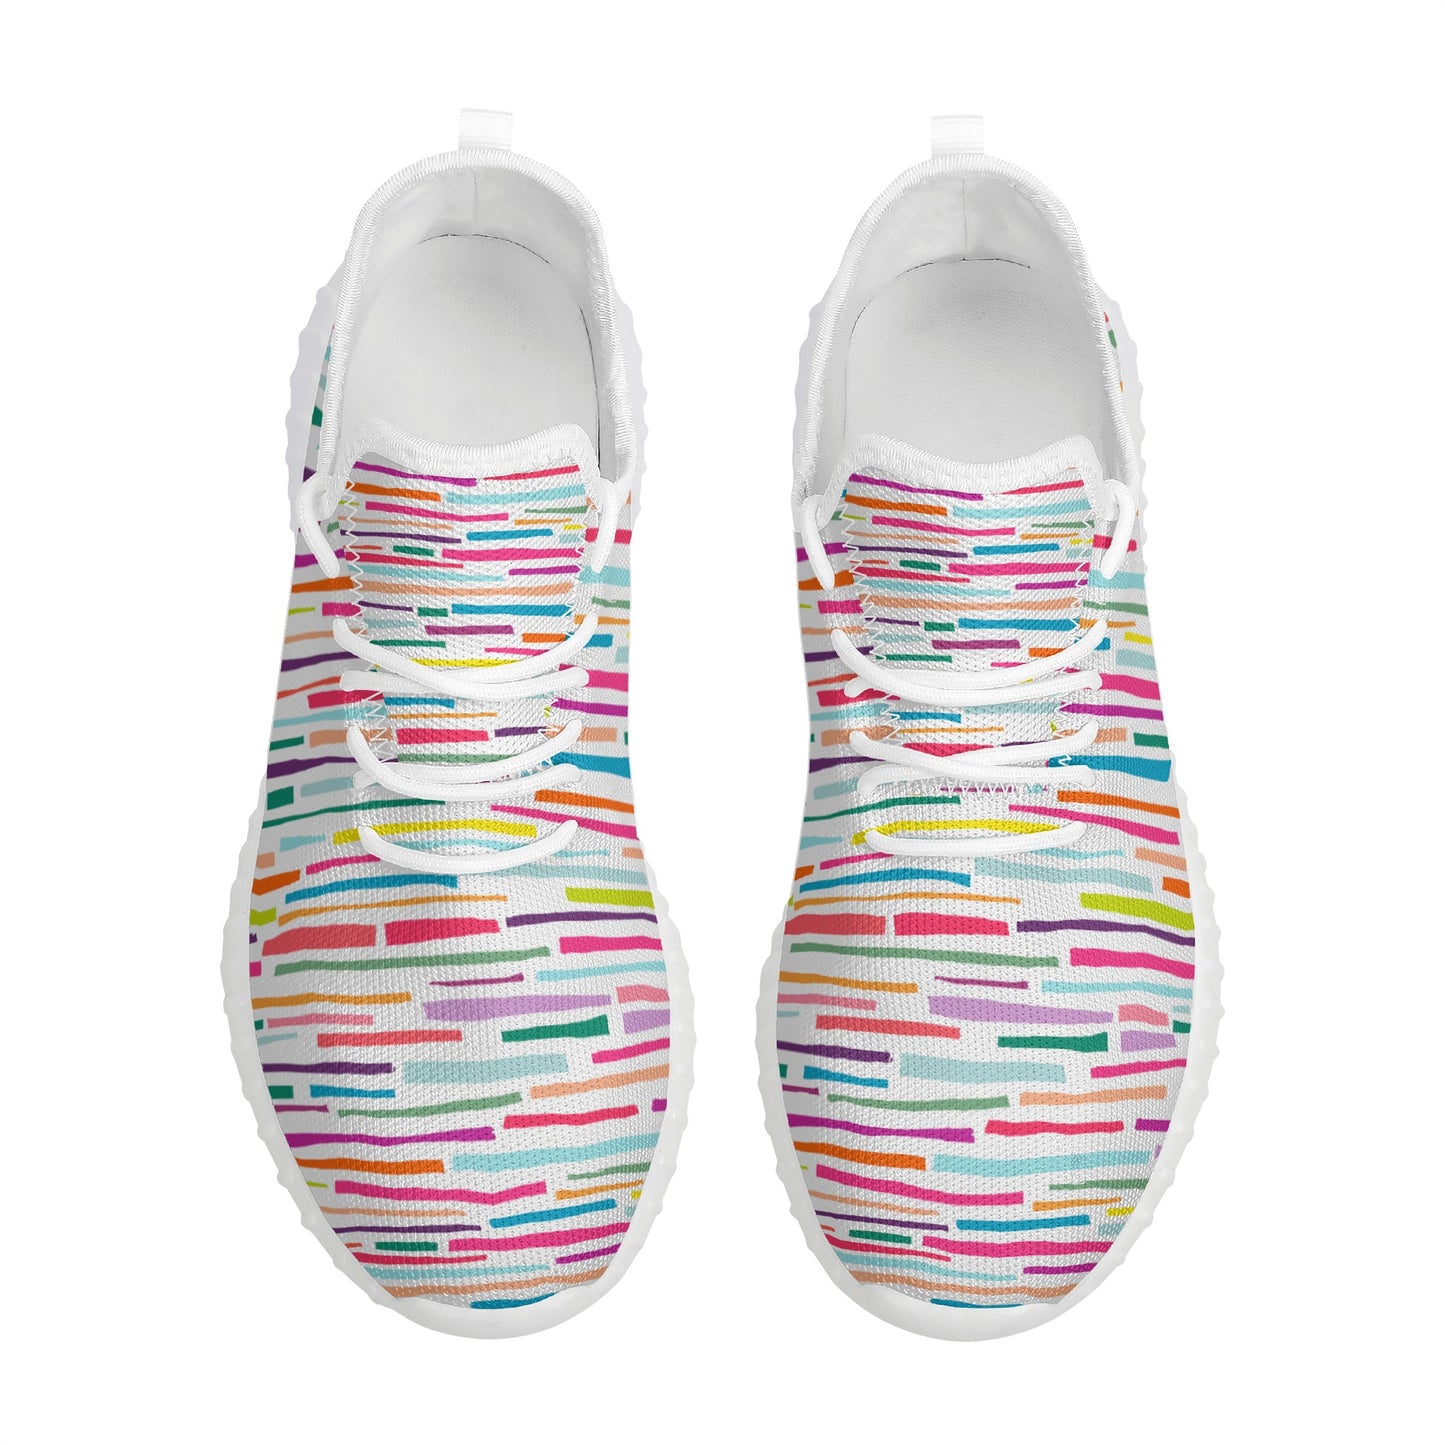 Lines of Color - PreTeen - Women's Mesh Knit Sneakers